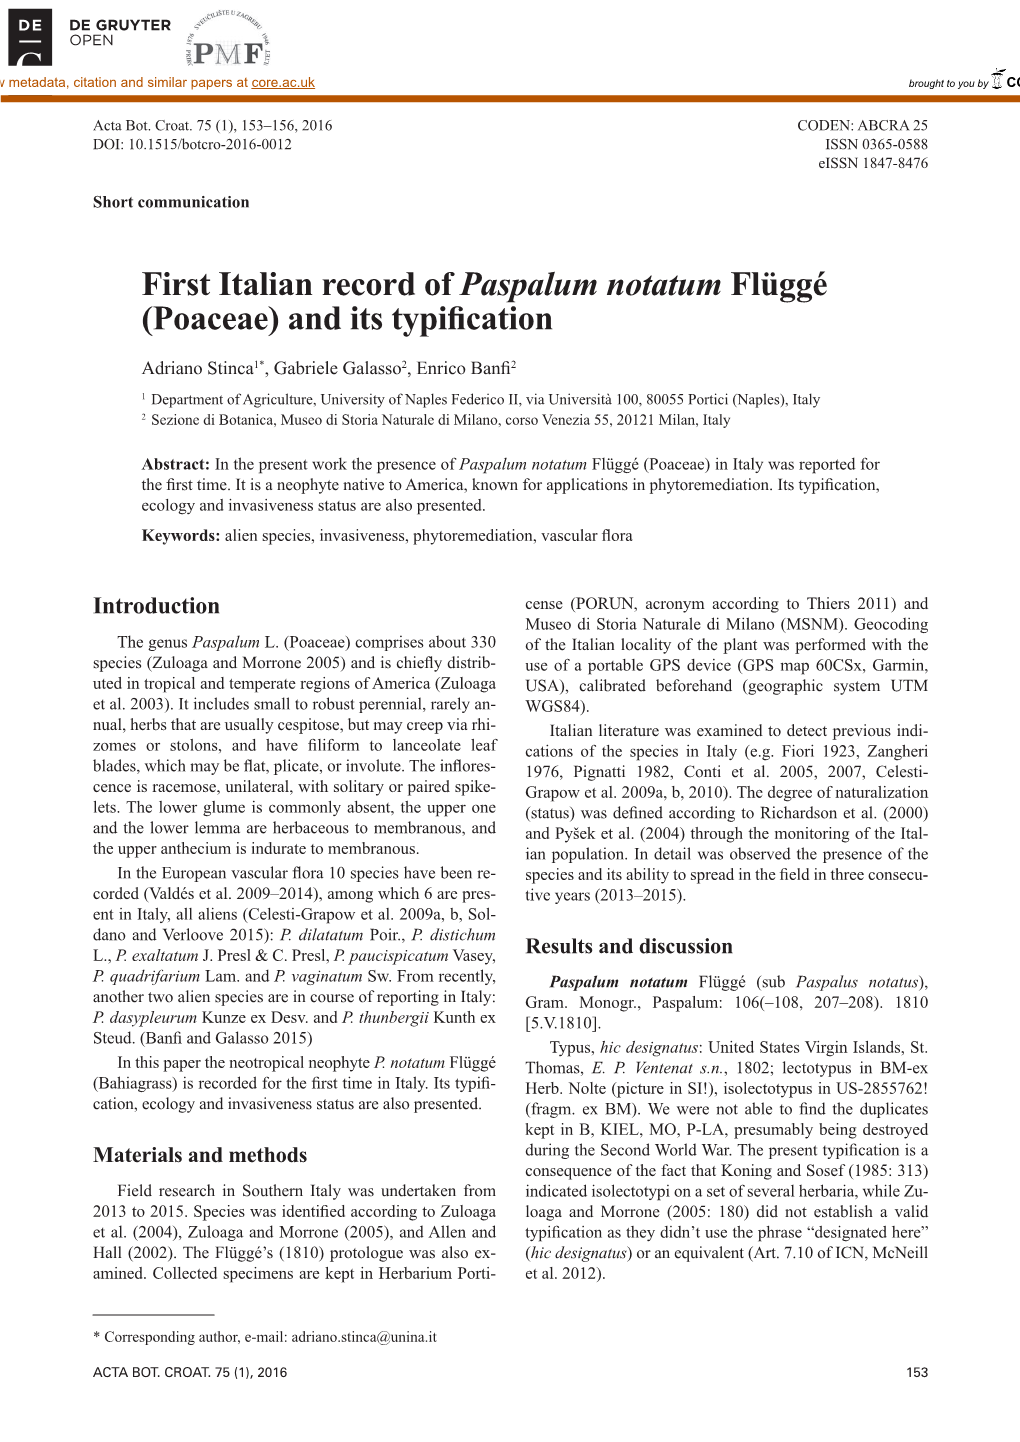 First Italian Record of Paspalum Notatum Flüggé (Poaceae) and Its Typiﬁ Cation